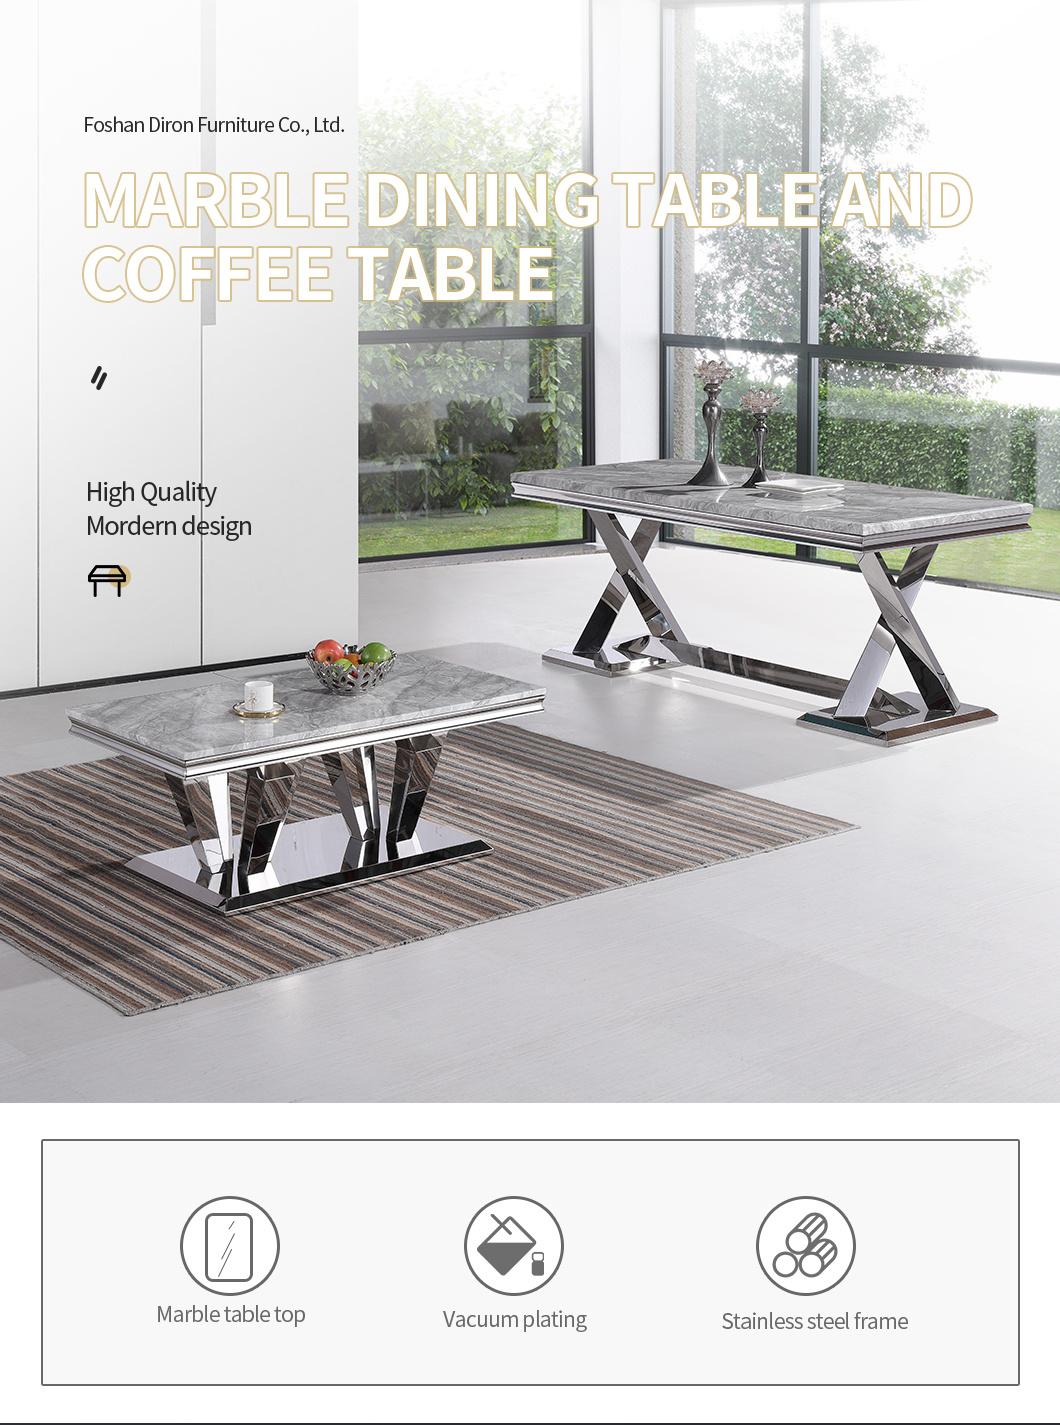 Cheap Price Glass Top Stainless Steel Dining Table for Dining Room Furniture